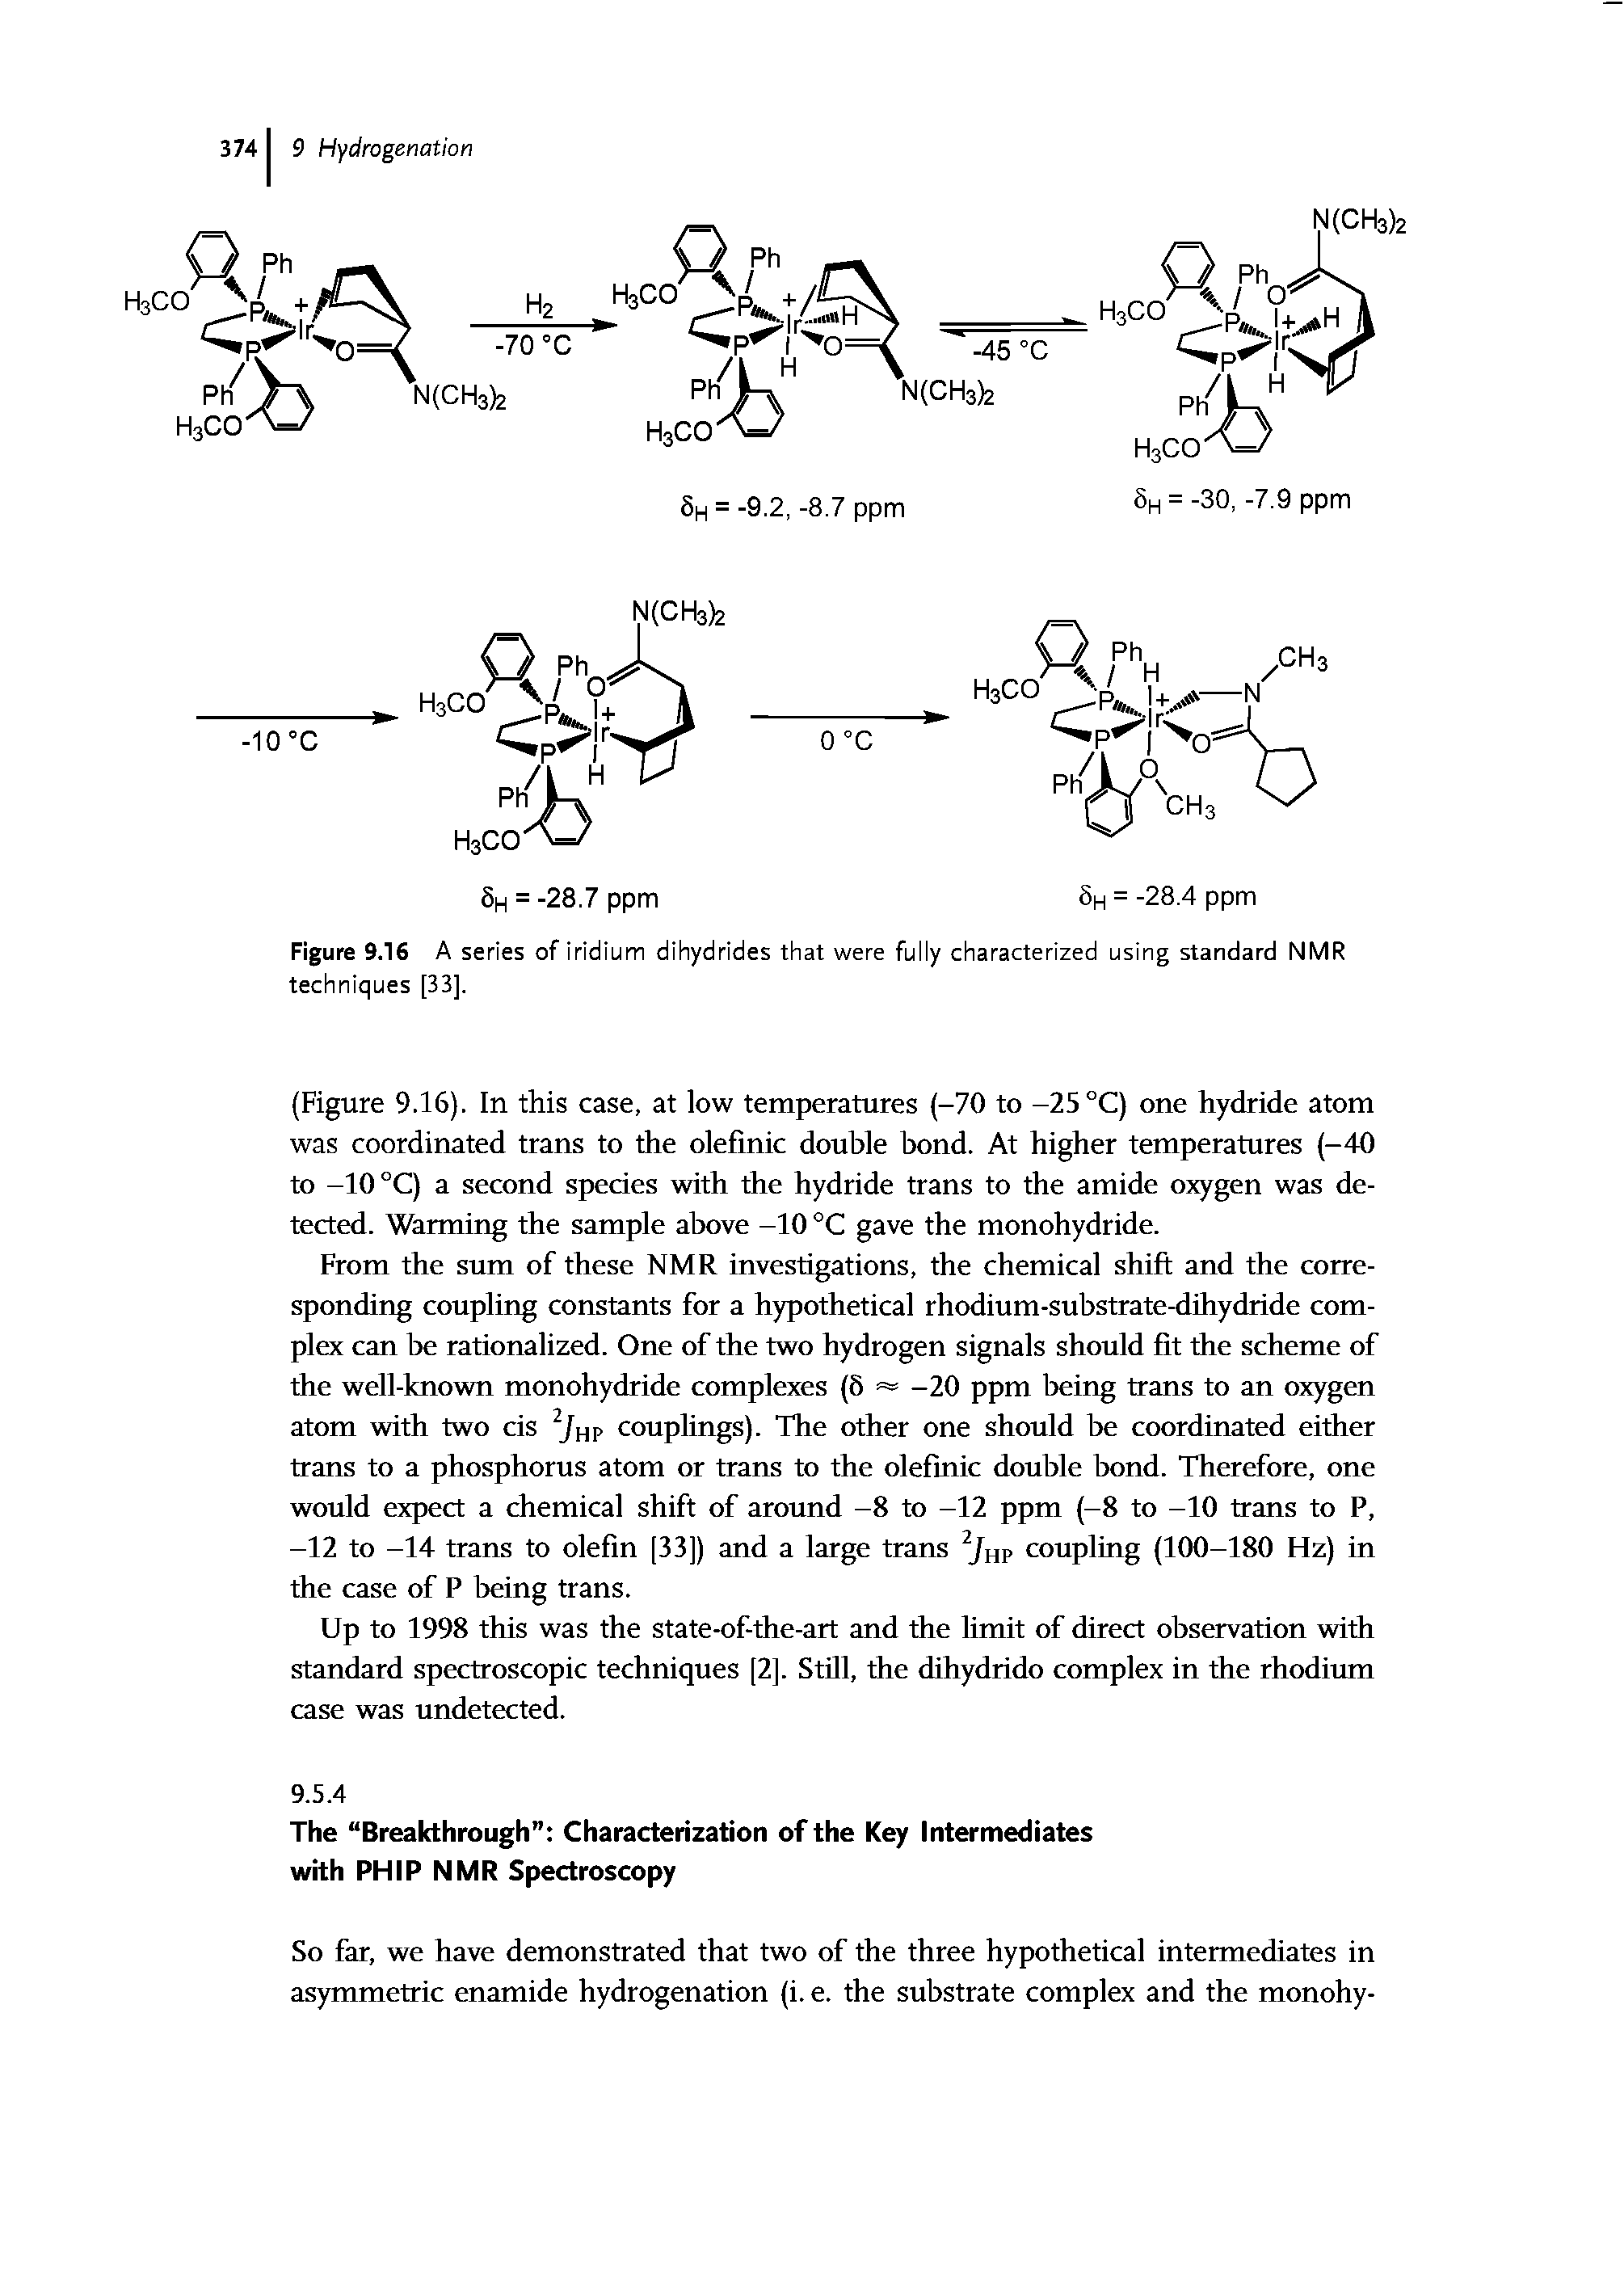 Figure 9.16 A series of iridium dihydrides that were fully characterized using standard NMR techniques [33].